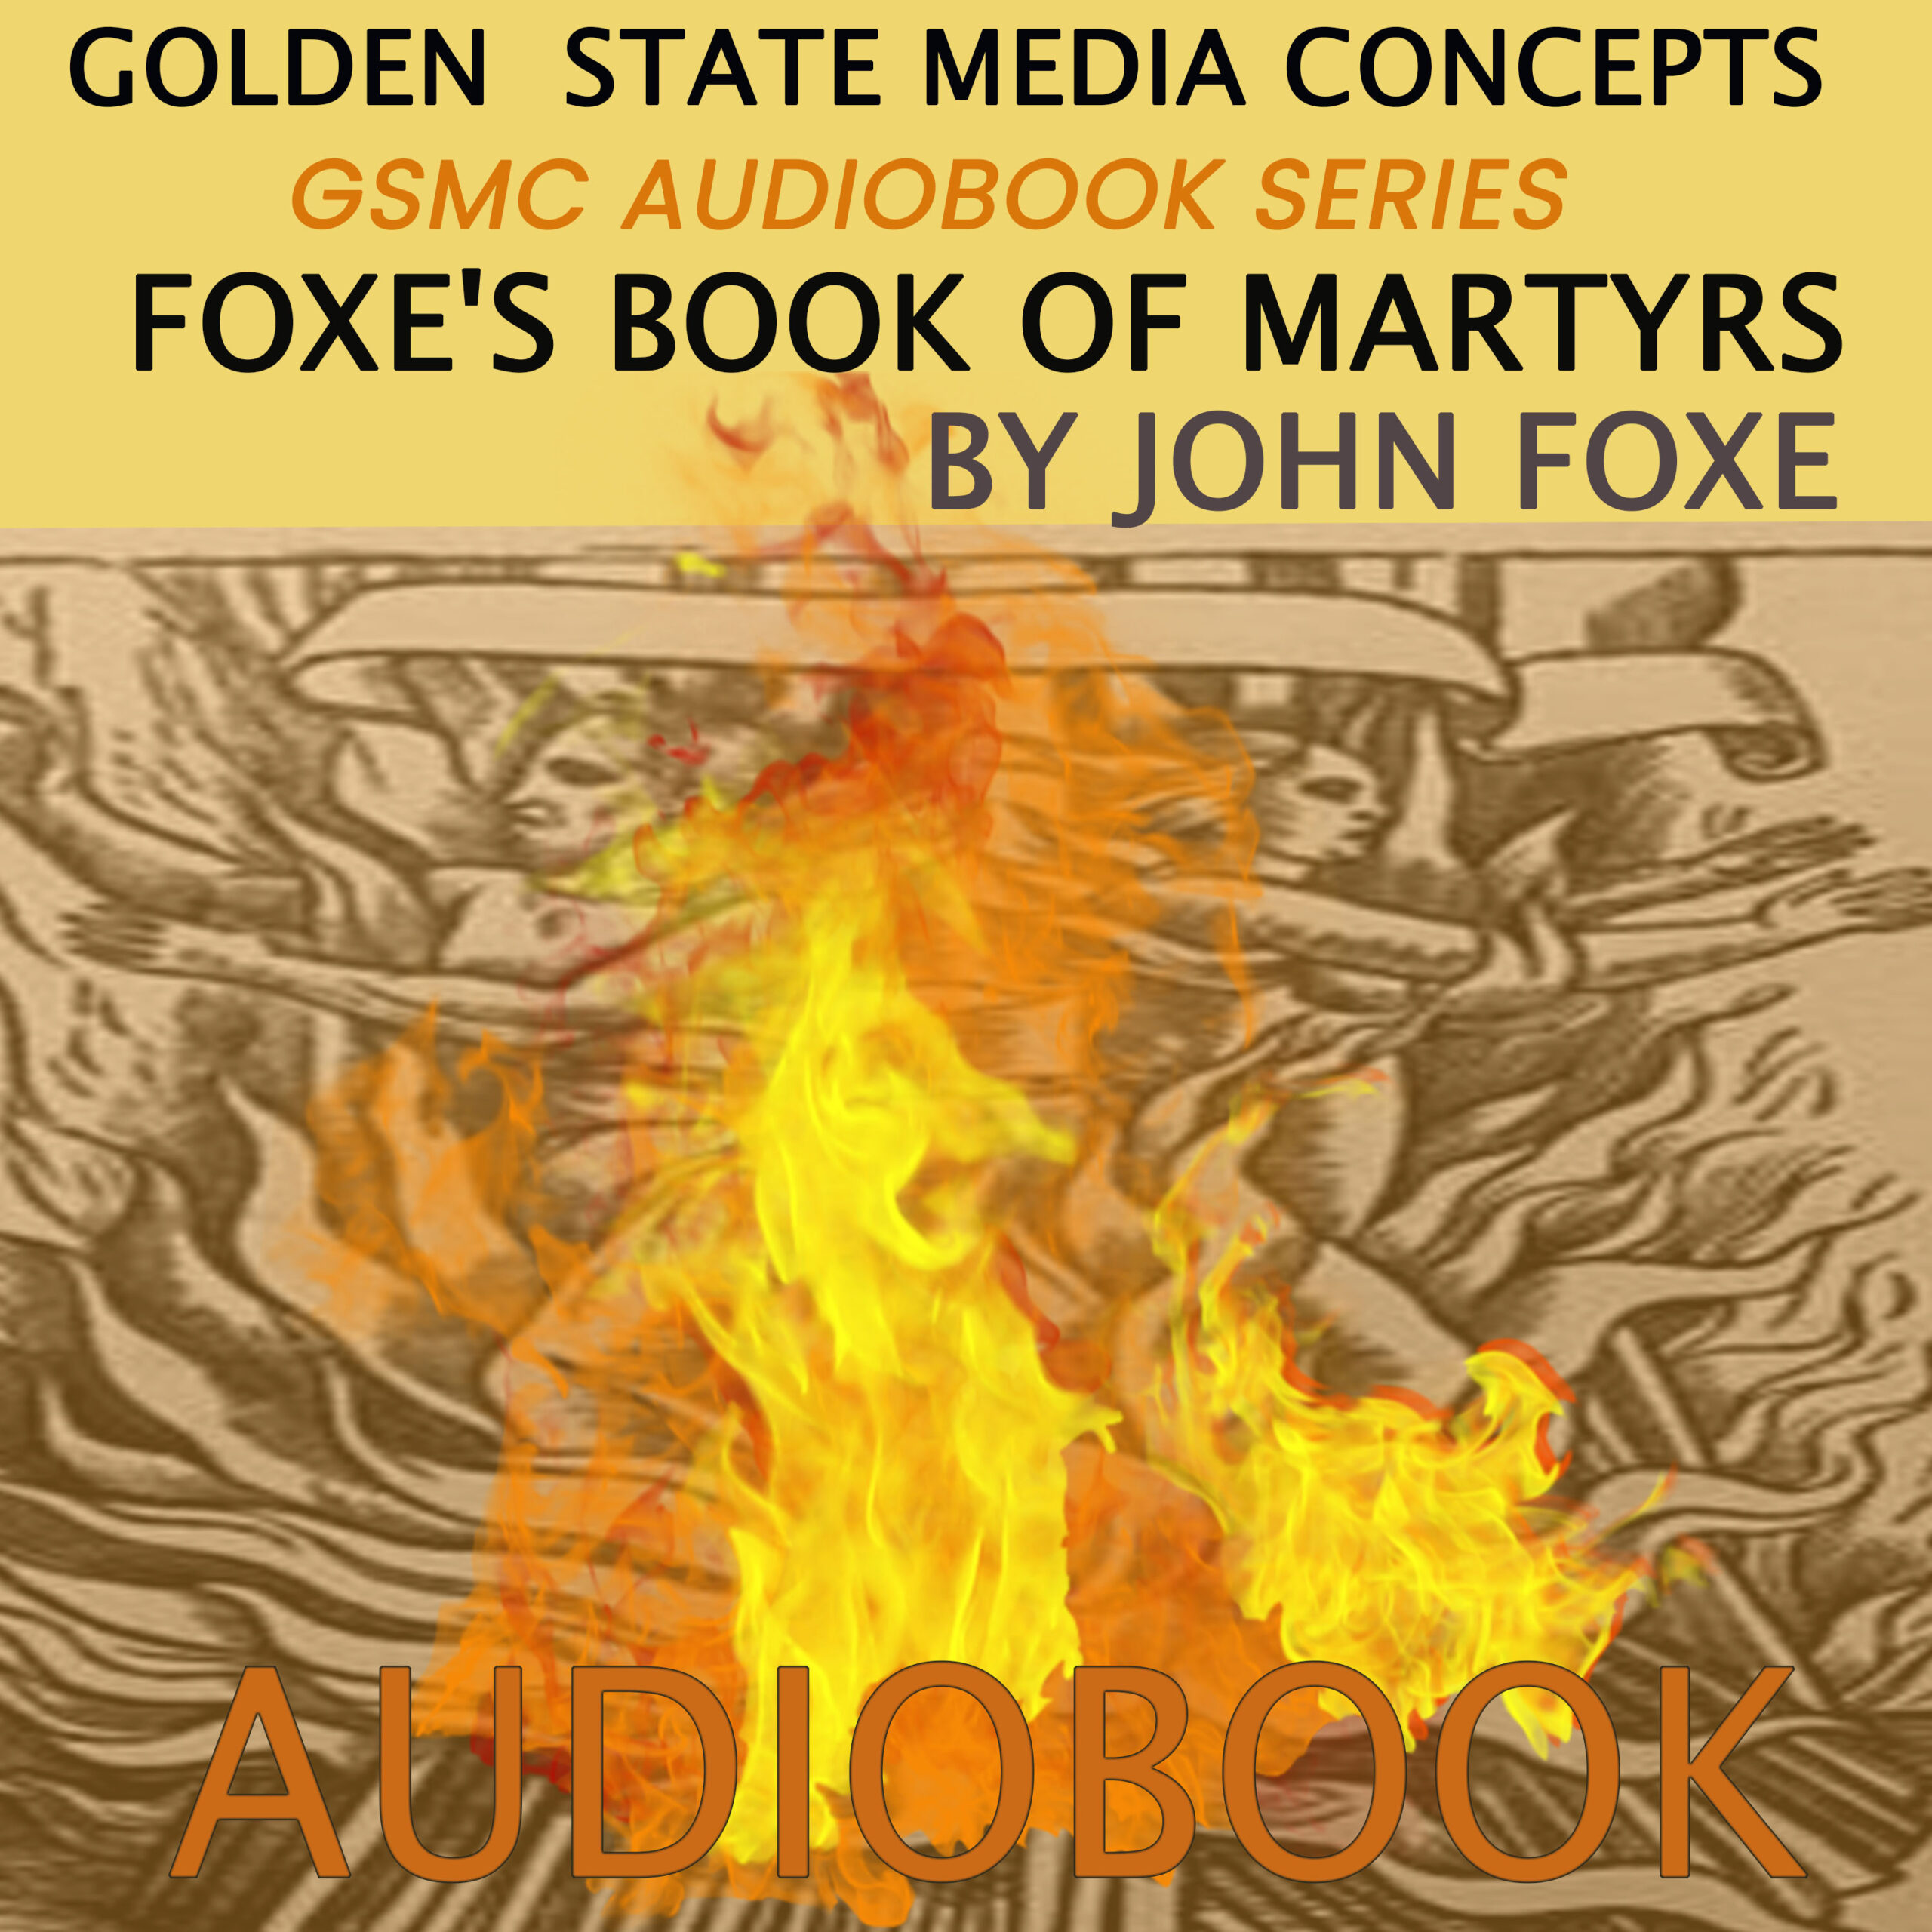 GSMC Audiobook Series: Foxe’s Book of Martyrs by John Foxe